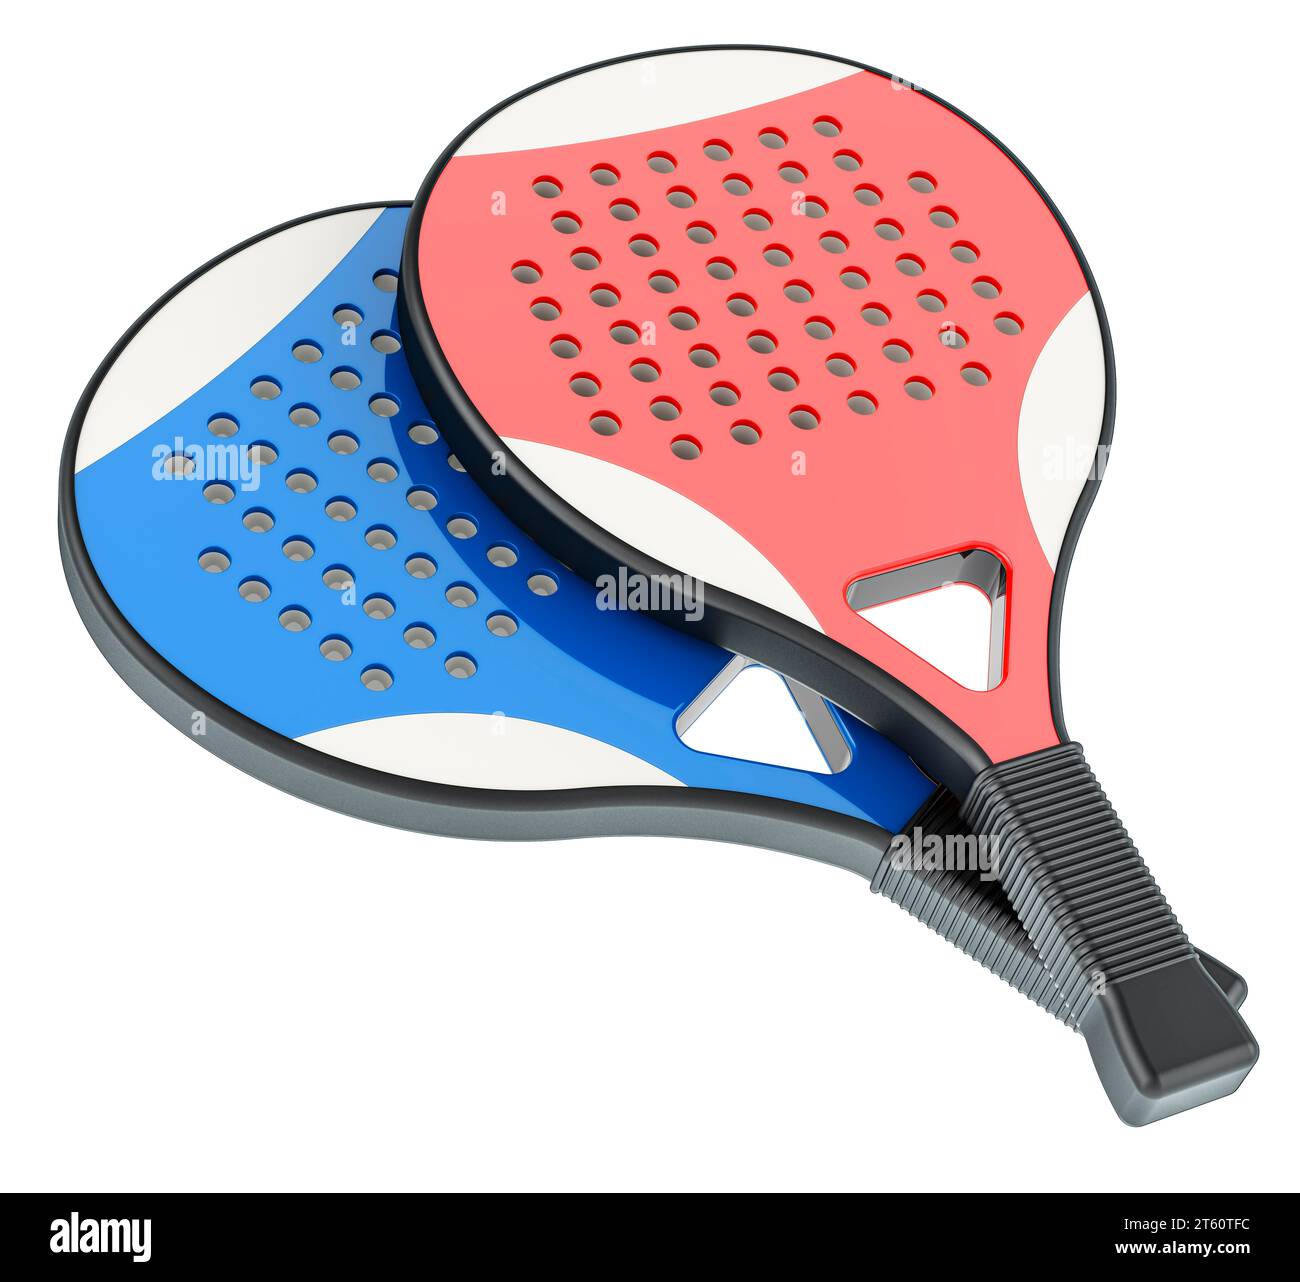 Paddle Tennis Rackets, 3D rendering isolated on white background Stock Photo